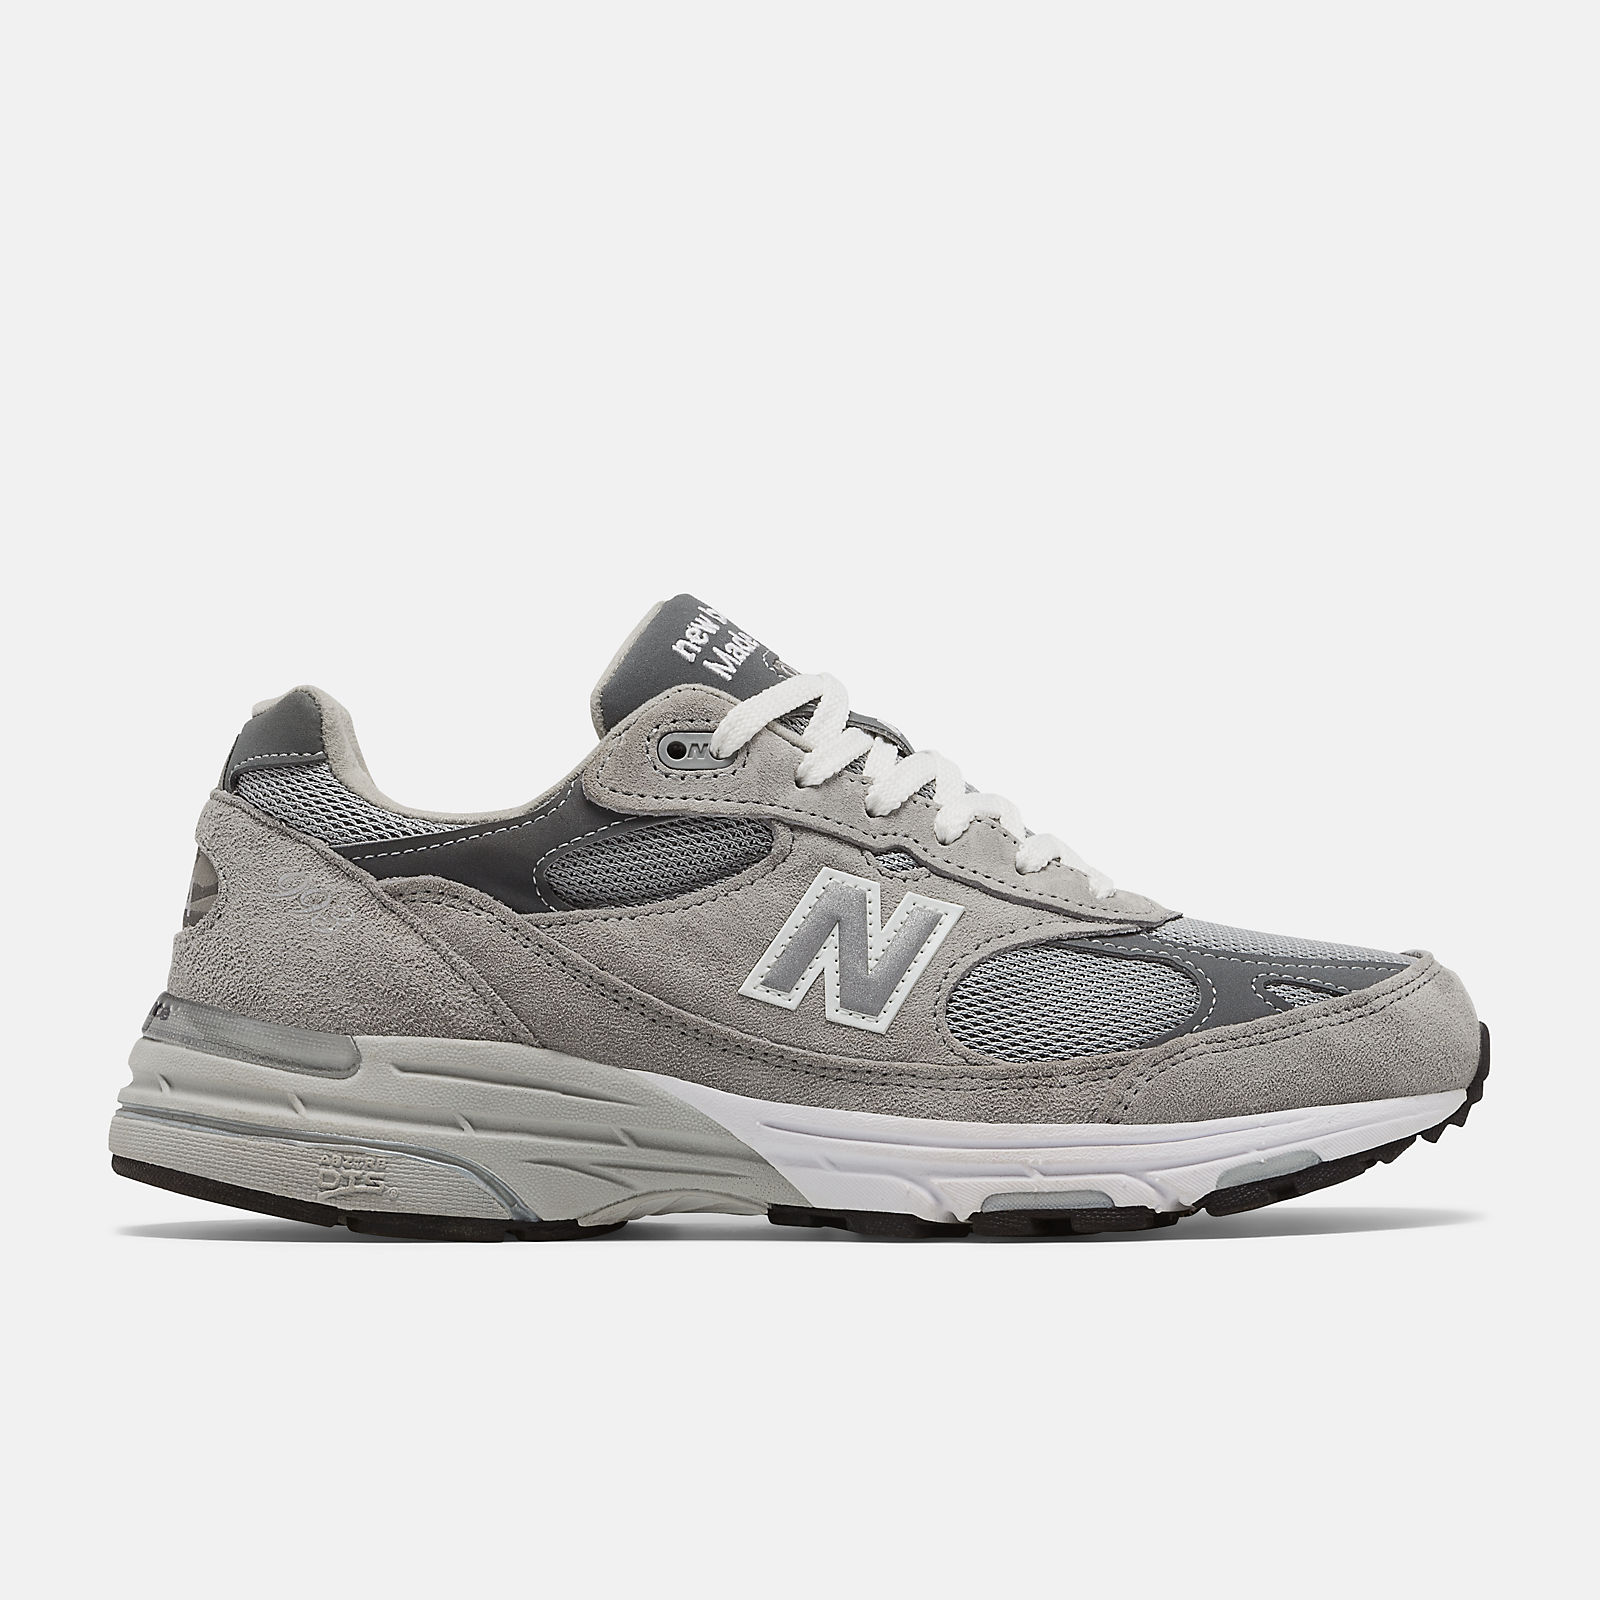 MADE in USA 993 Core - New Balance